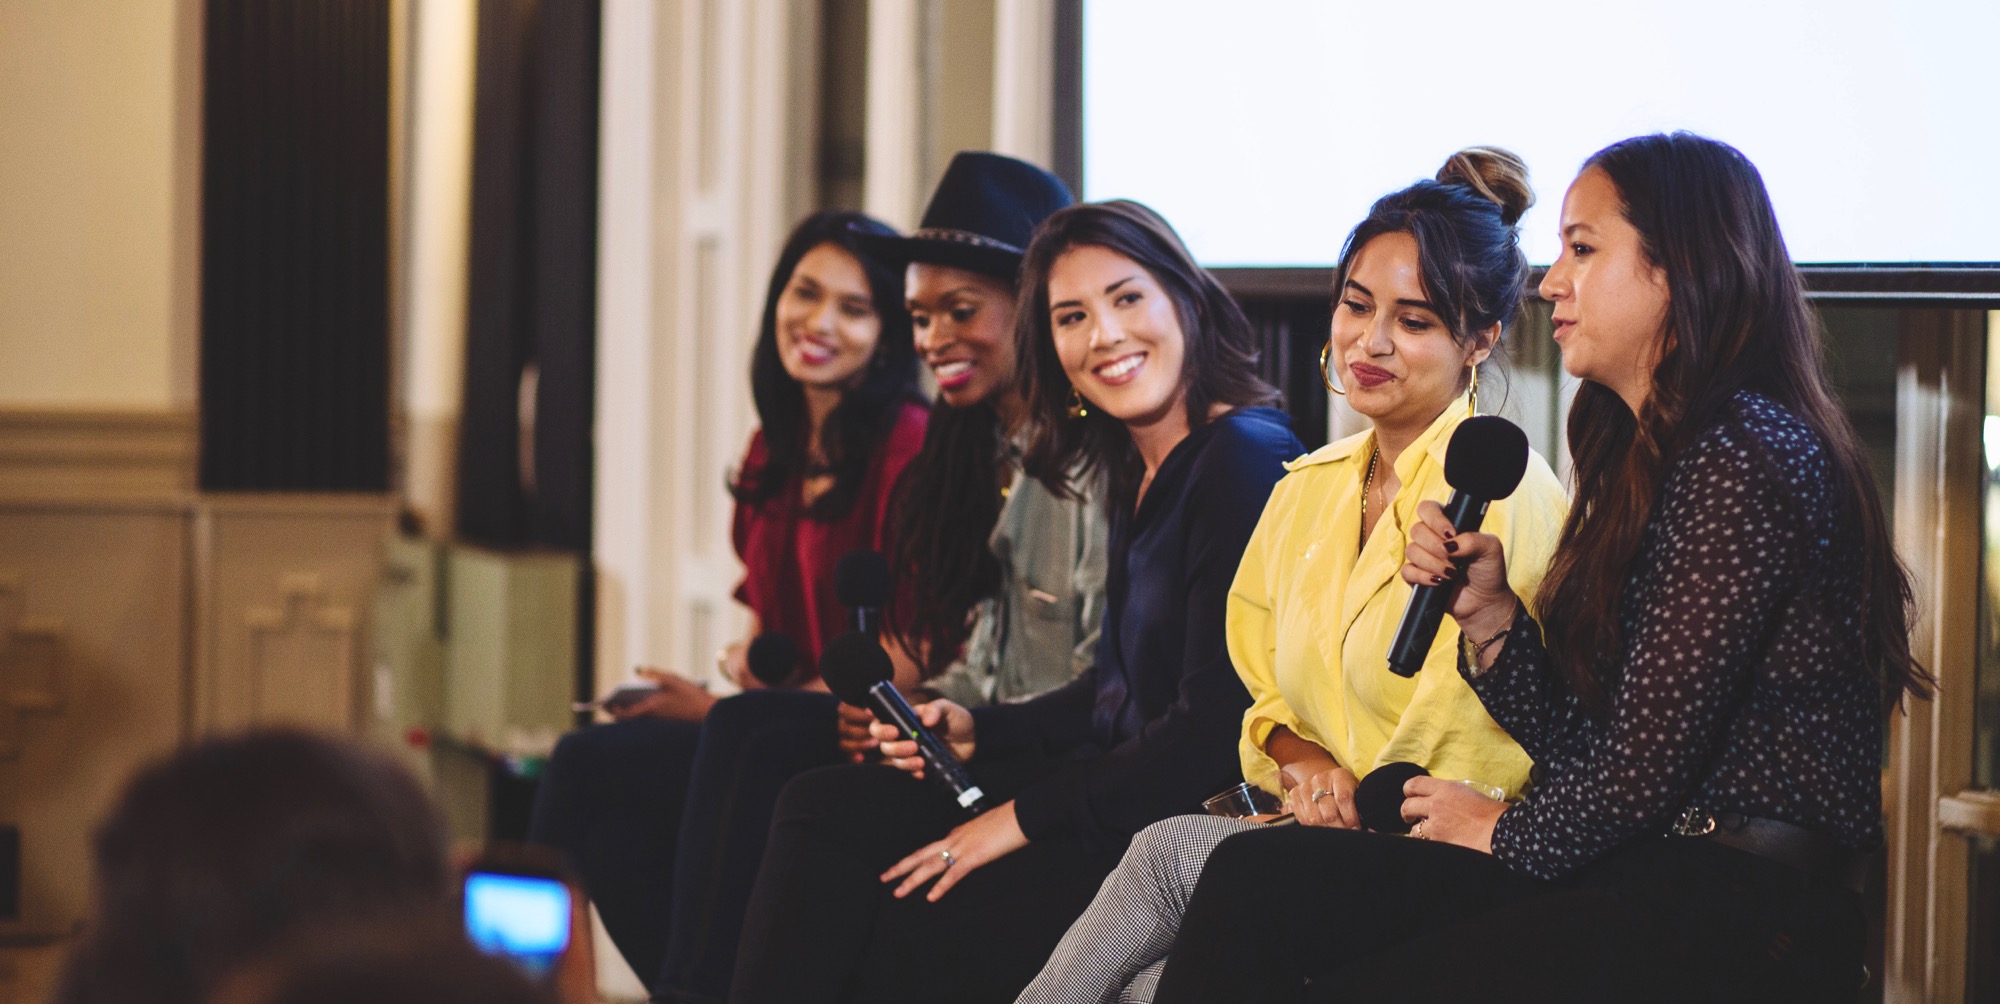 WeWork and Girlboss cohosted an event with self-care brand founders